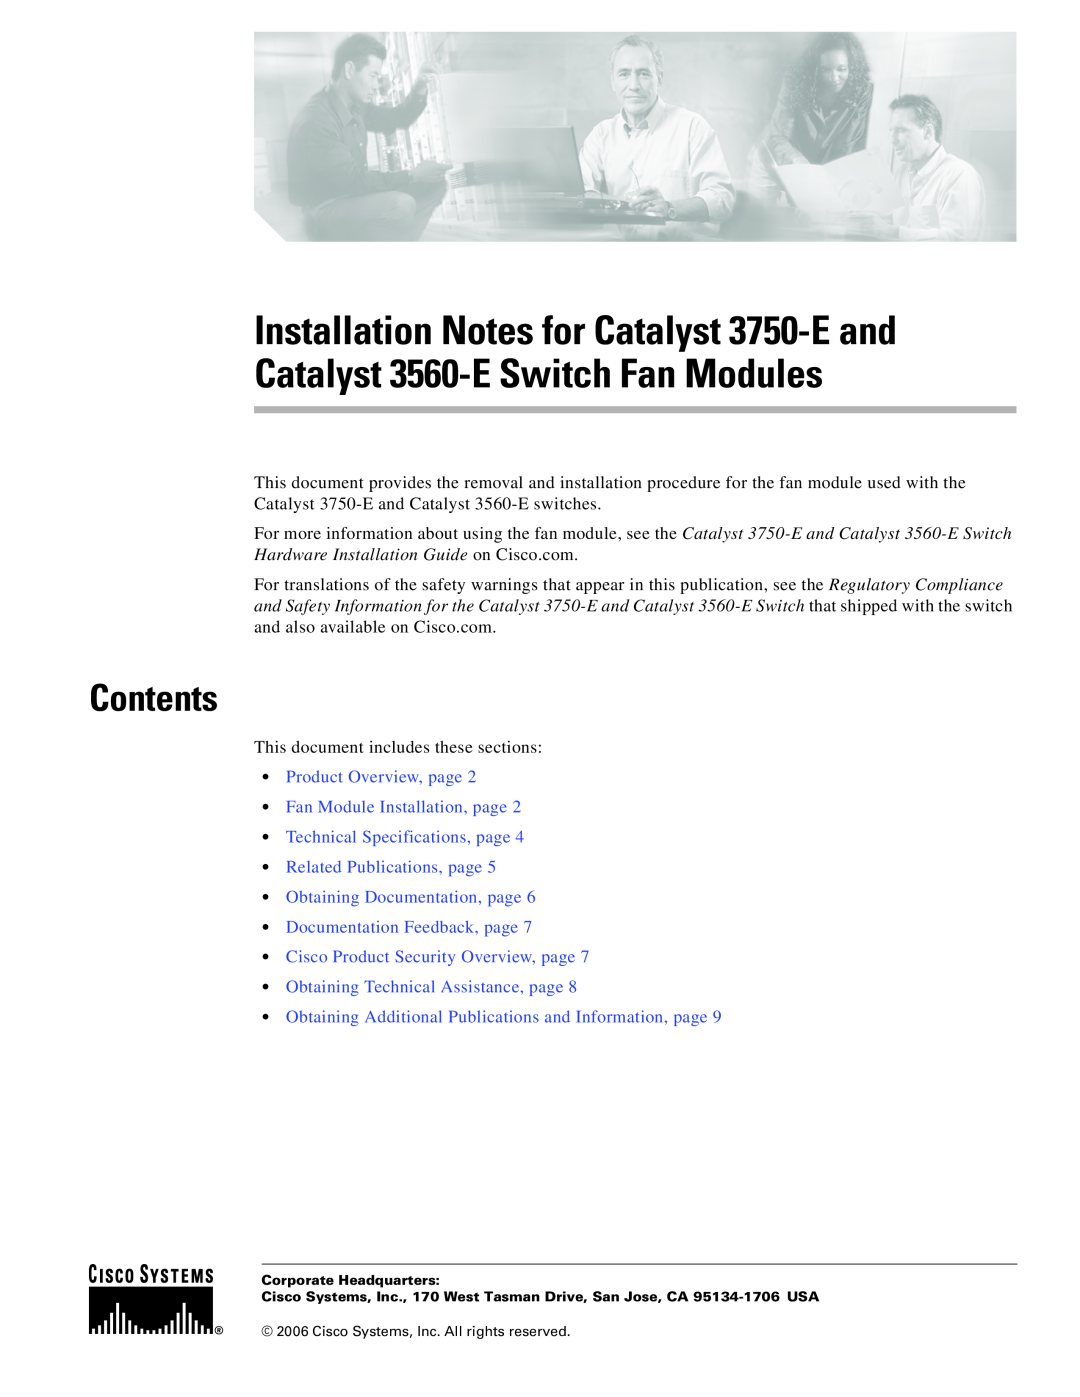 Cisco Systems Catalyst 3560-E technical specifications Contents, Product Overview, page Fan Module Installation, page 